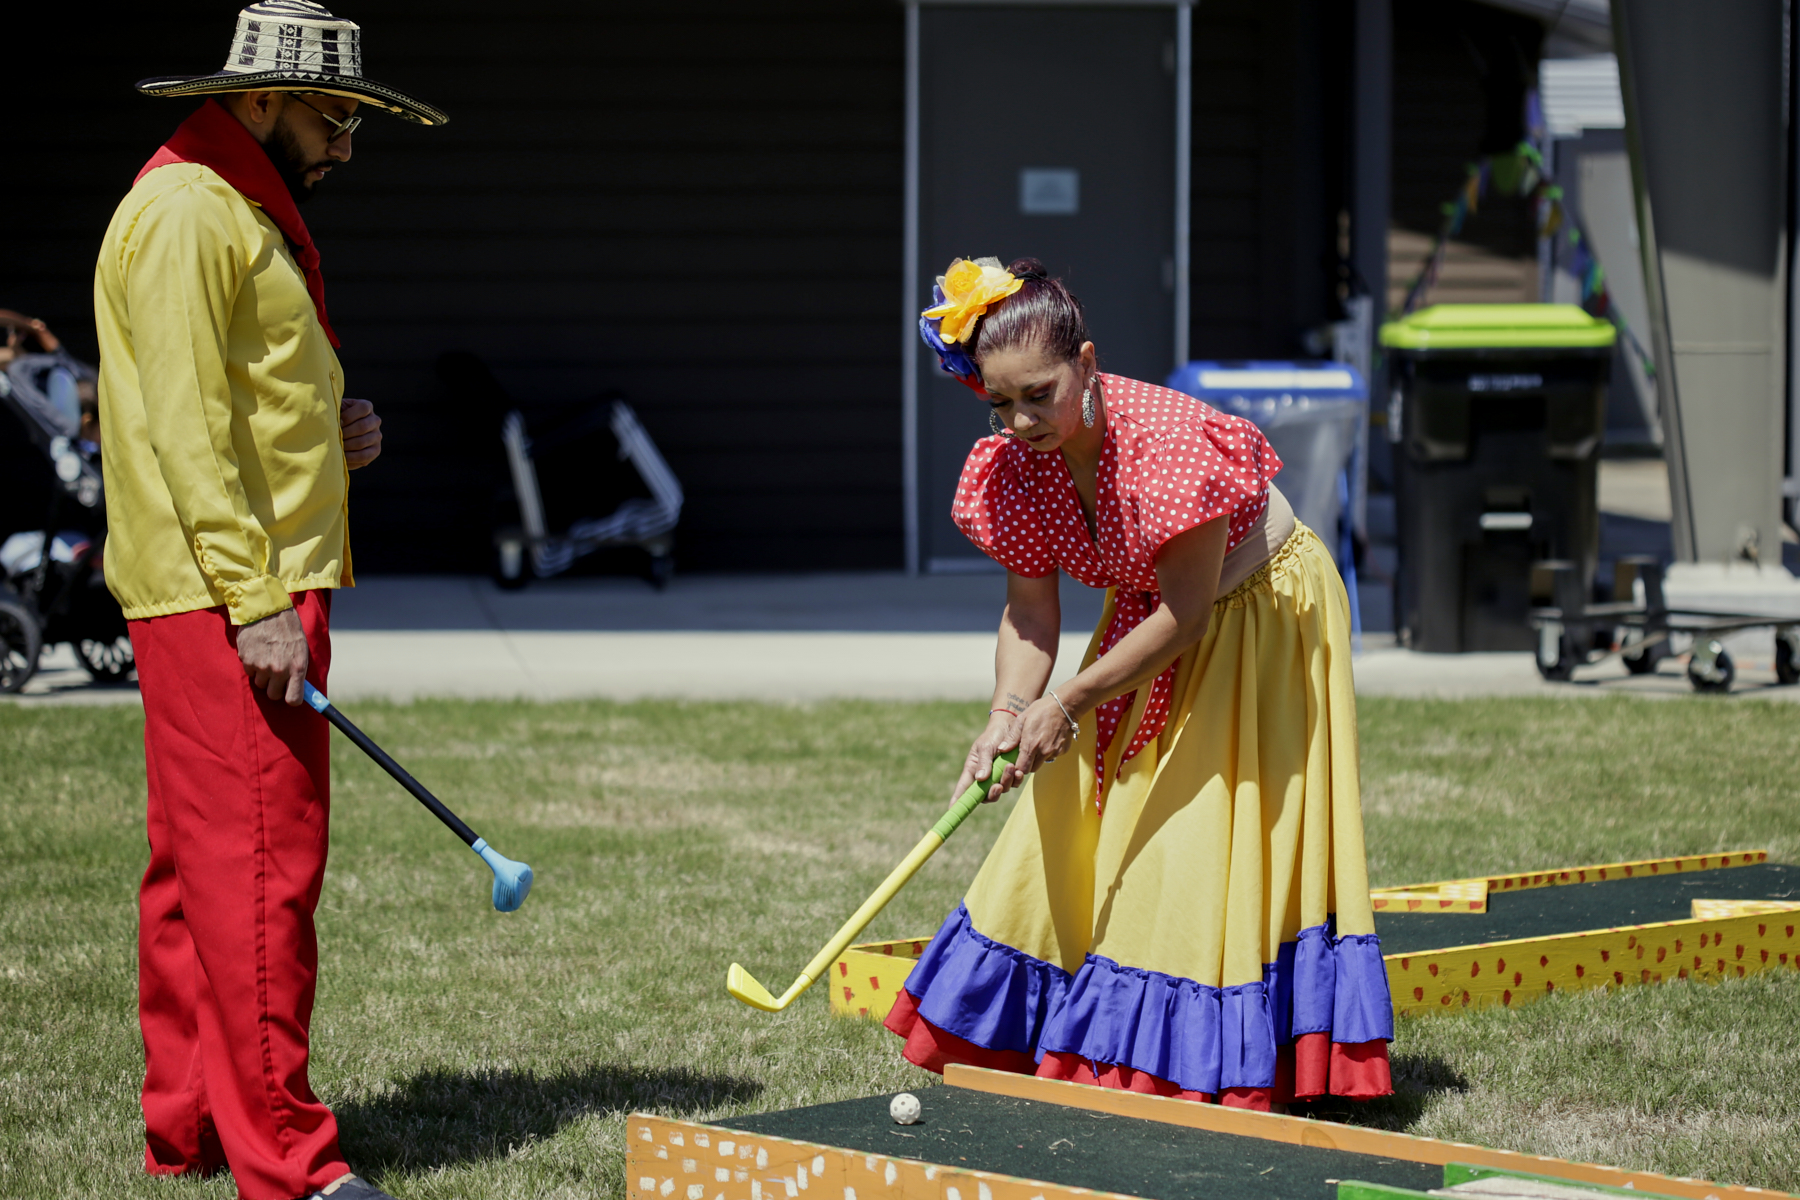 Members of Takiri Folclor Latino, in colorful traditional outfits, playing mini golf